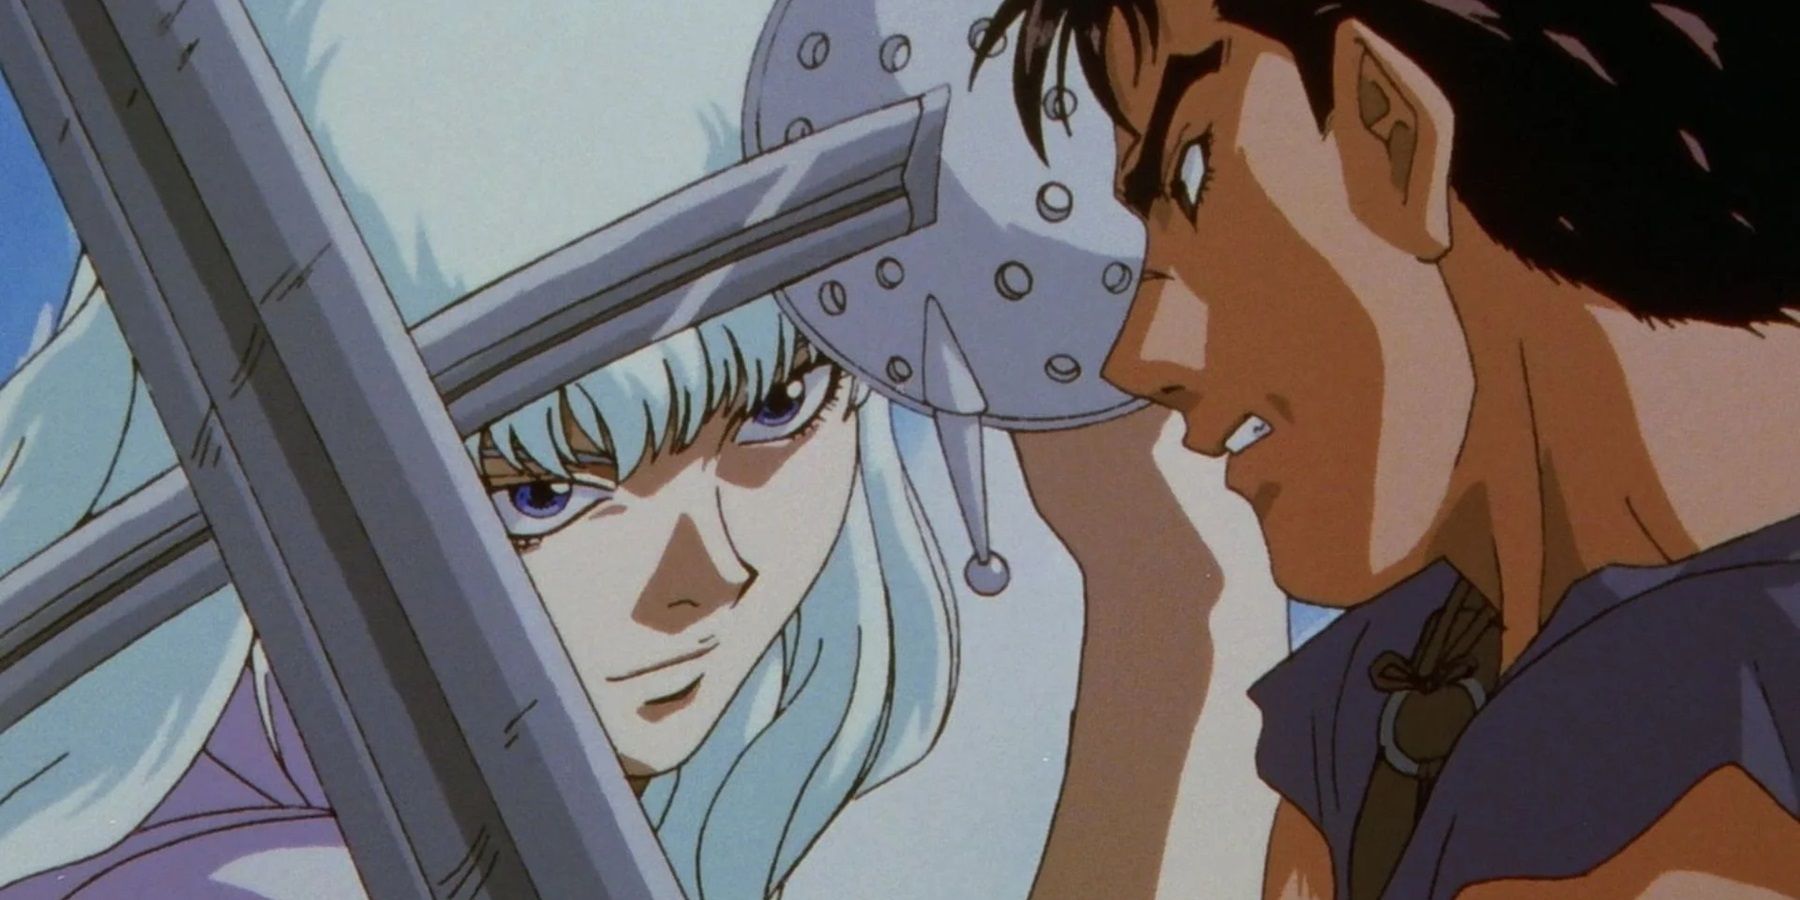 Giffith and Guts sword-fighting one another in the 1997 Berserk anime